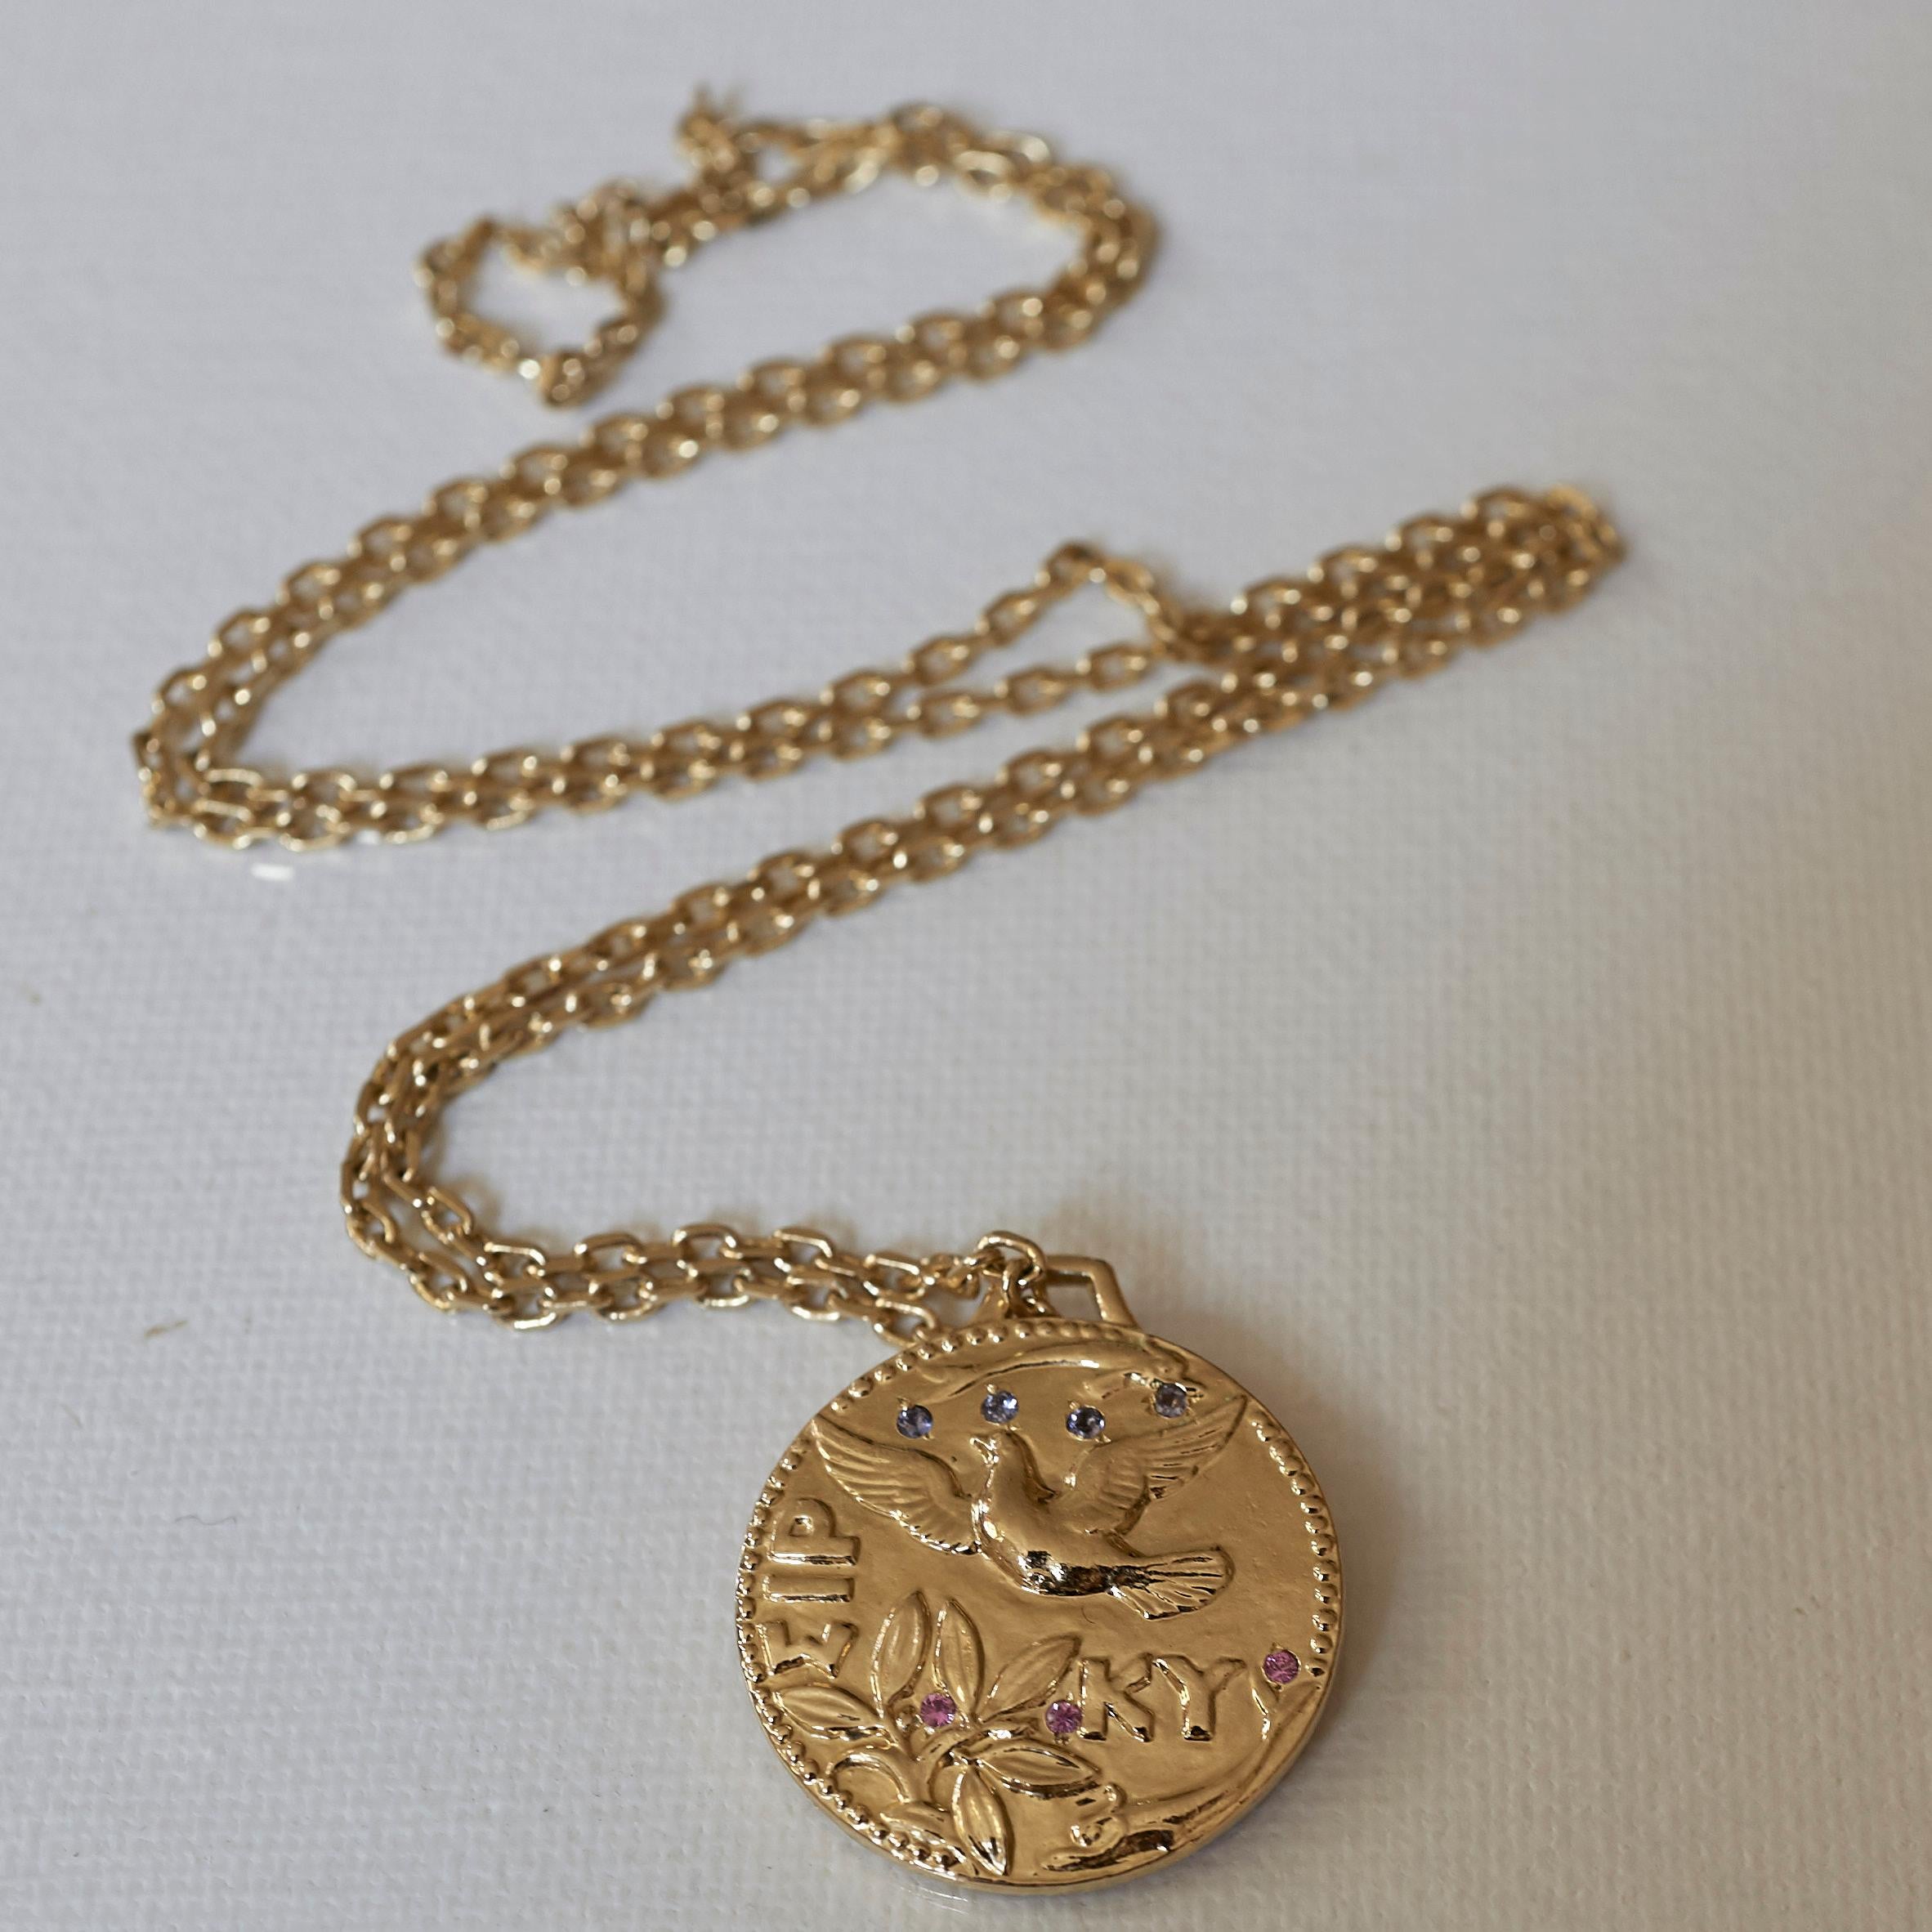 Sapphire Medal Coin Chain Necklace Dove Pegasus Tanzanite J Dauphin

This piece has two greek coins soldered together with a dove and the other one with a Pegasus. On the side of the dove its has 4 Tanzanites and 3 Pink Sapphires. The coin is made